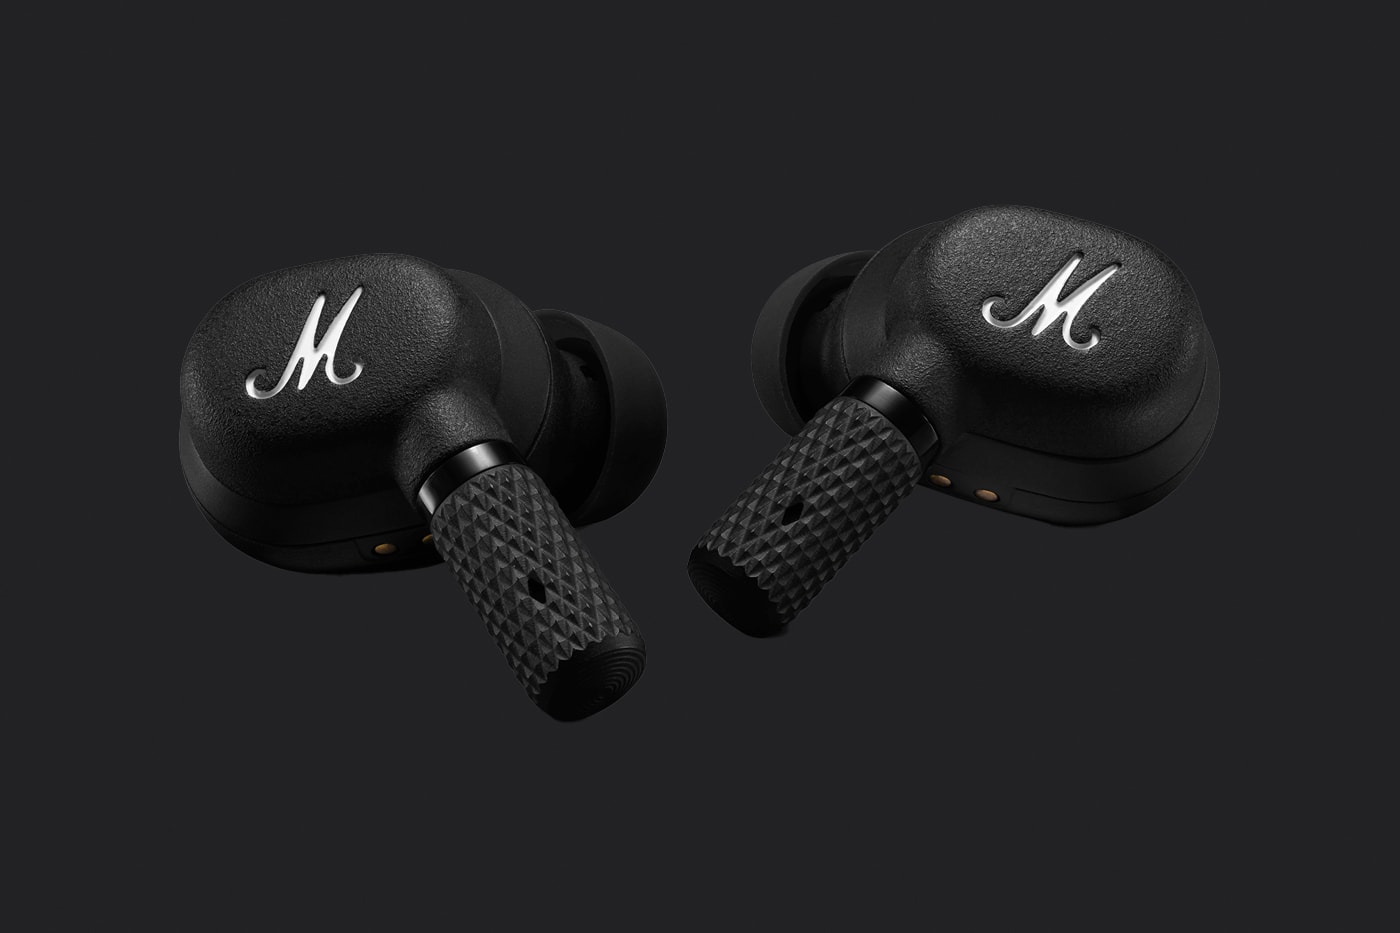 Marshall Releases Its First ANC Wireless Earbuds active noise cancelling equalizer EQ mode touch response sensistive all black leather scratch proof water resistant release info